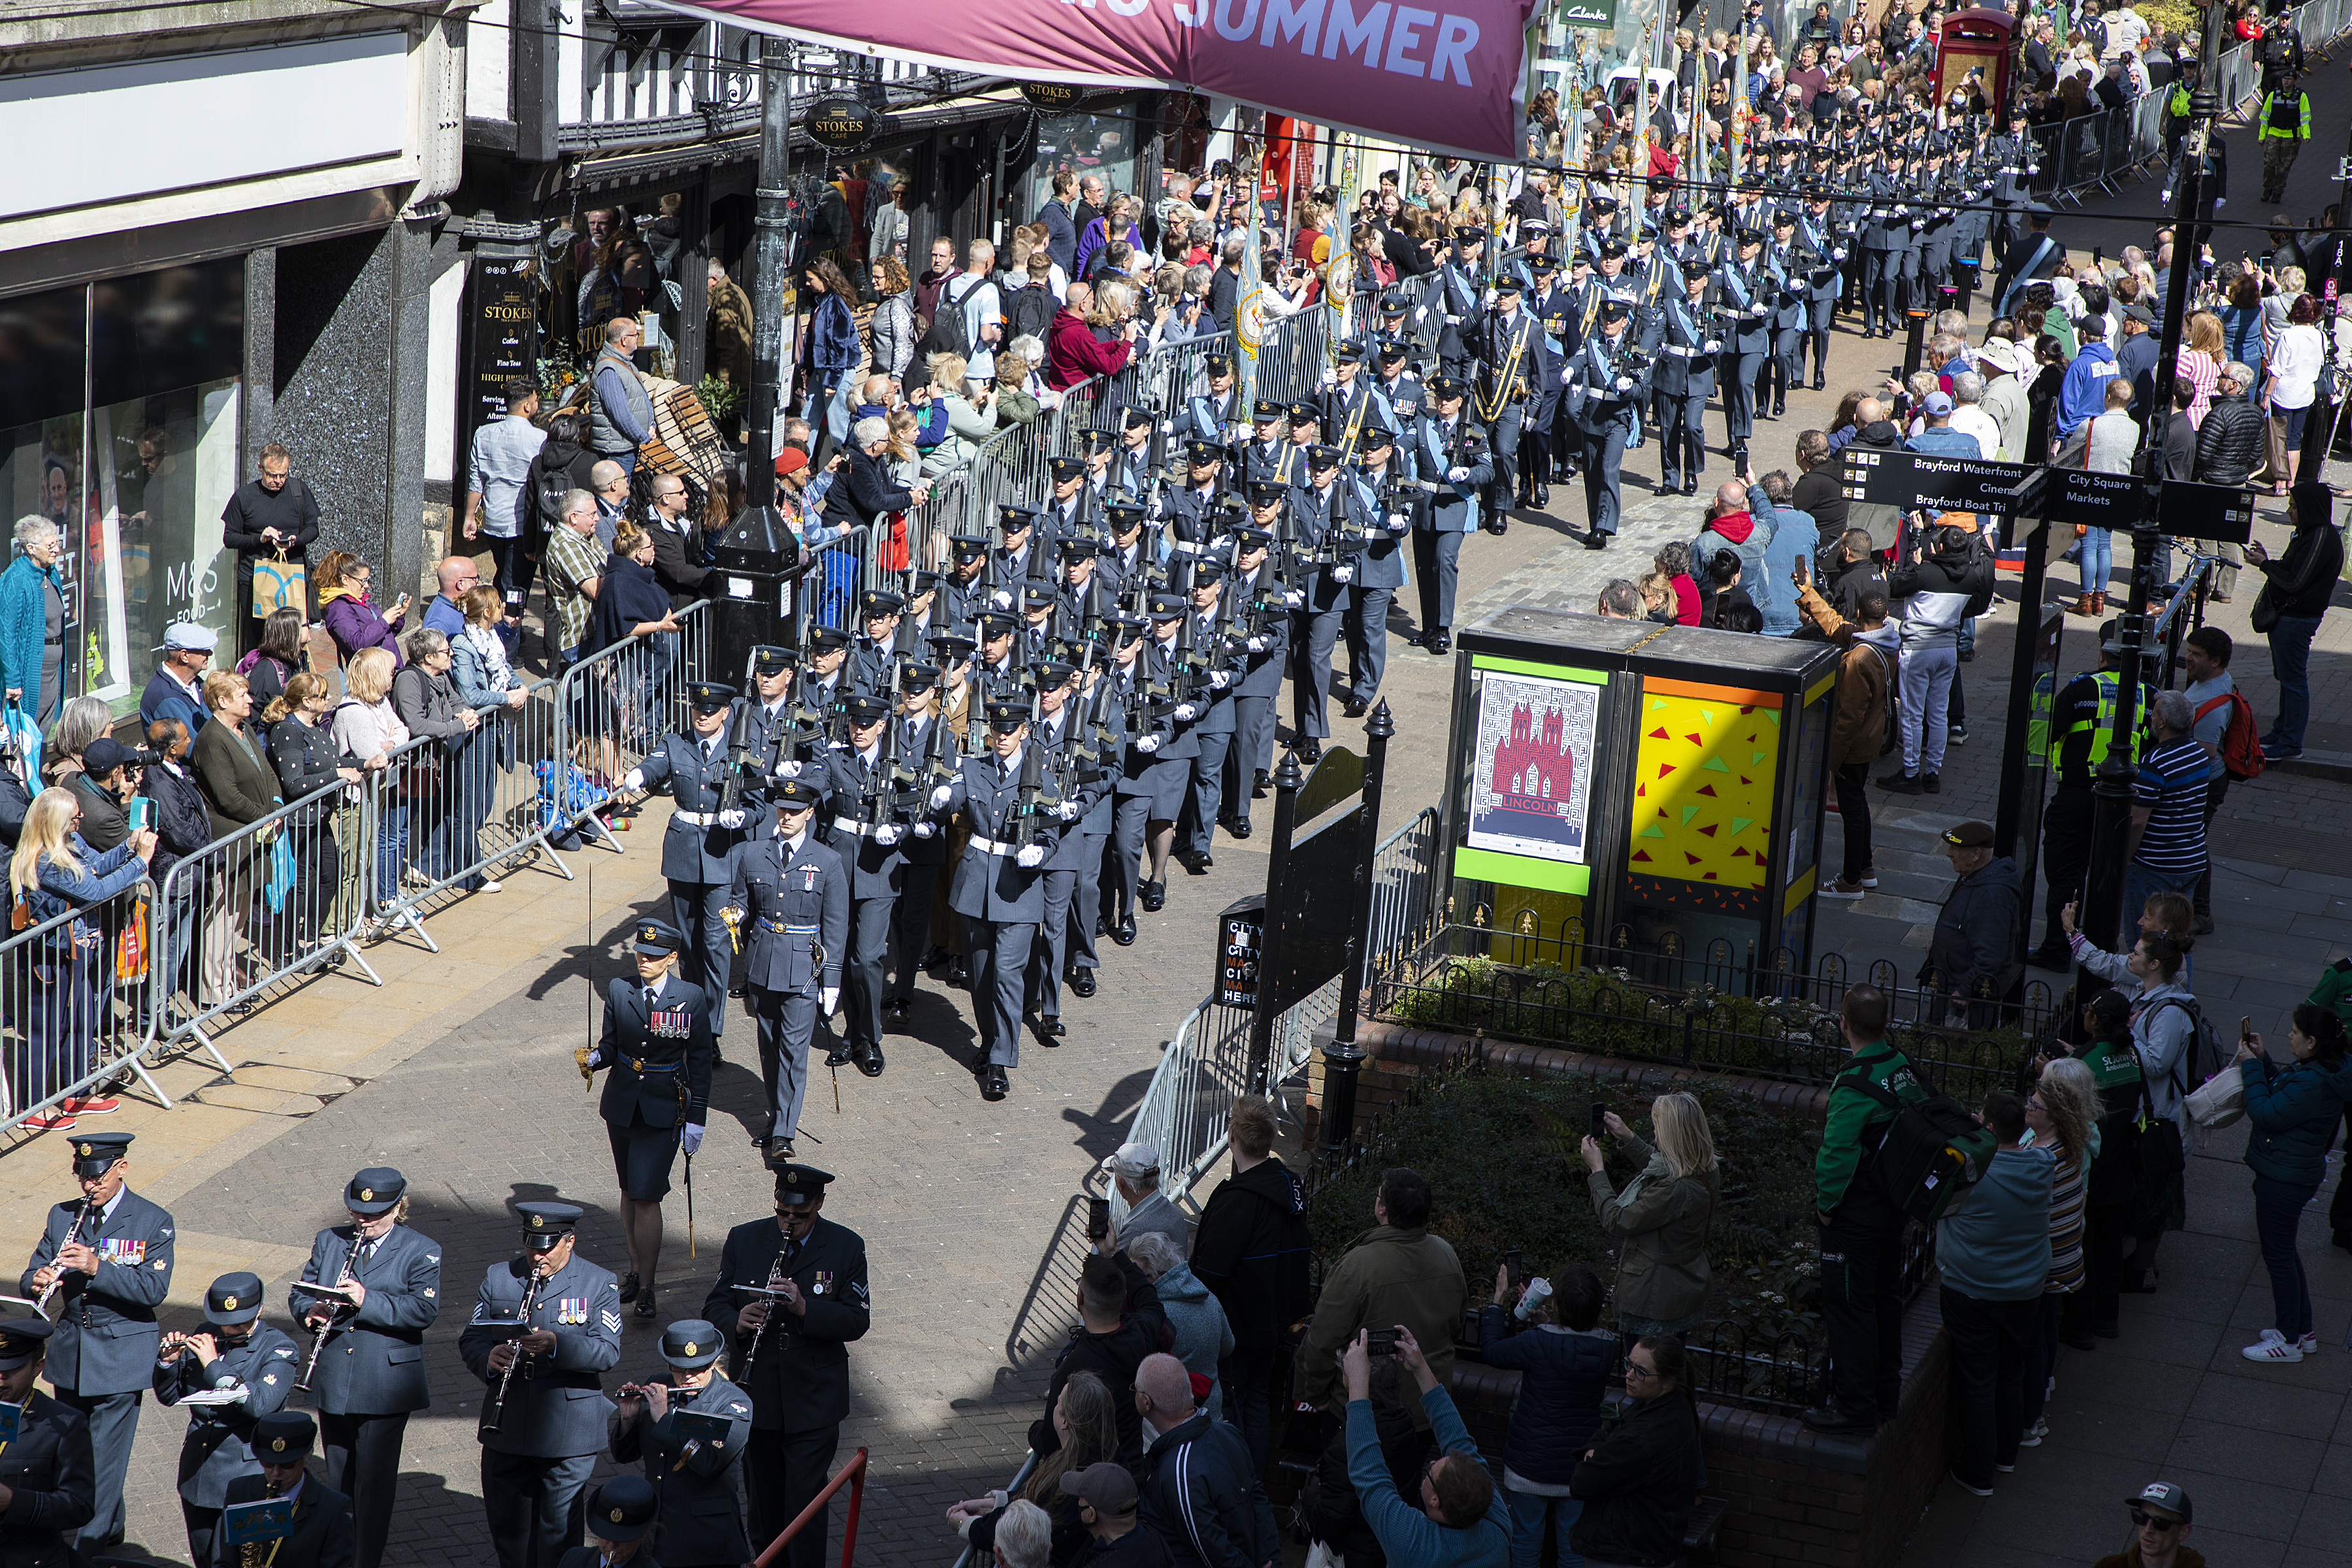 Personnel parade through the street, with public behind barriers.